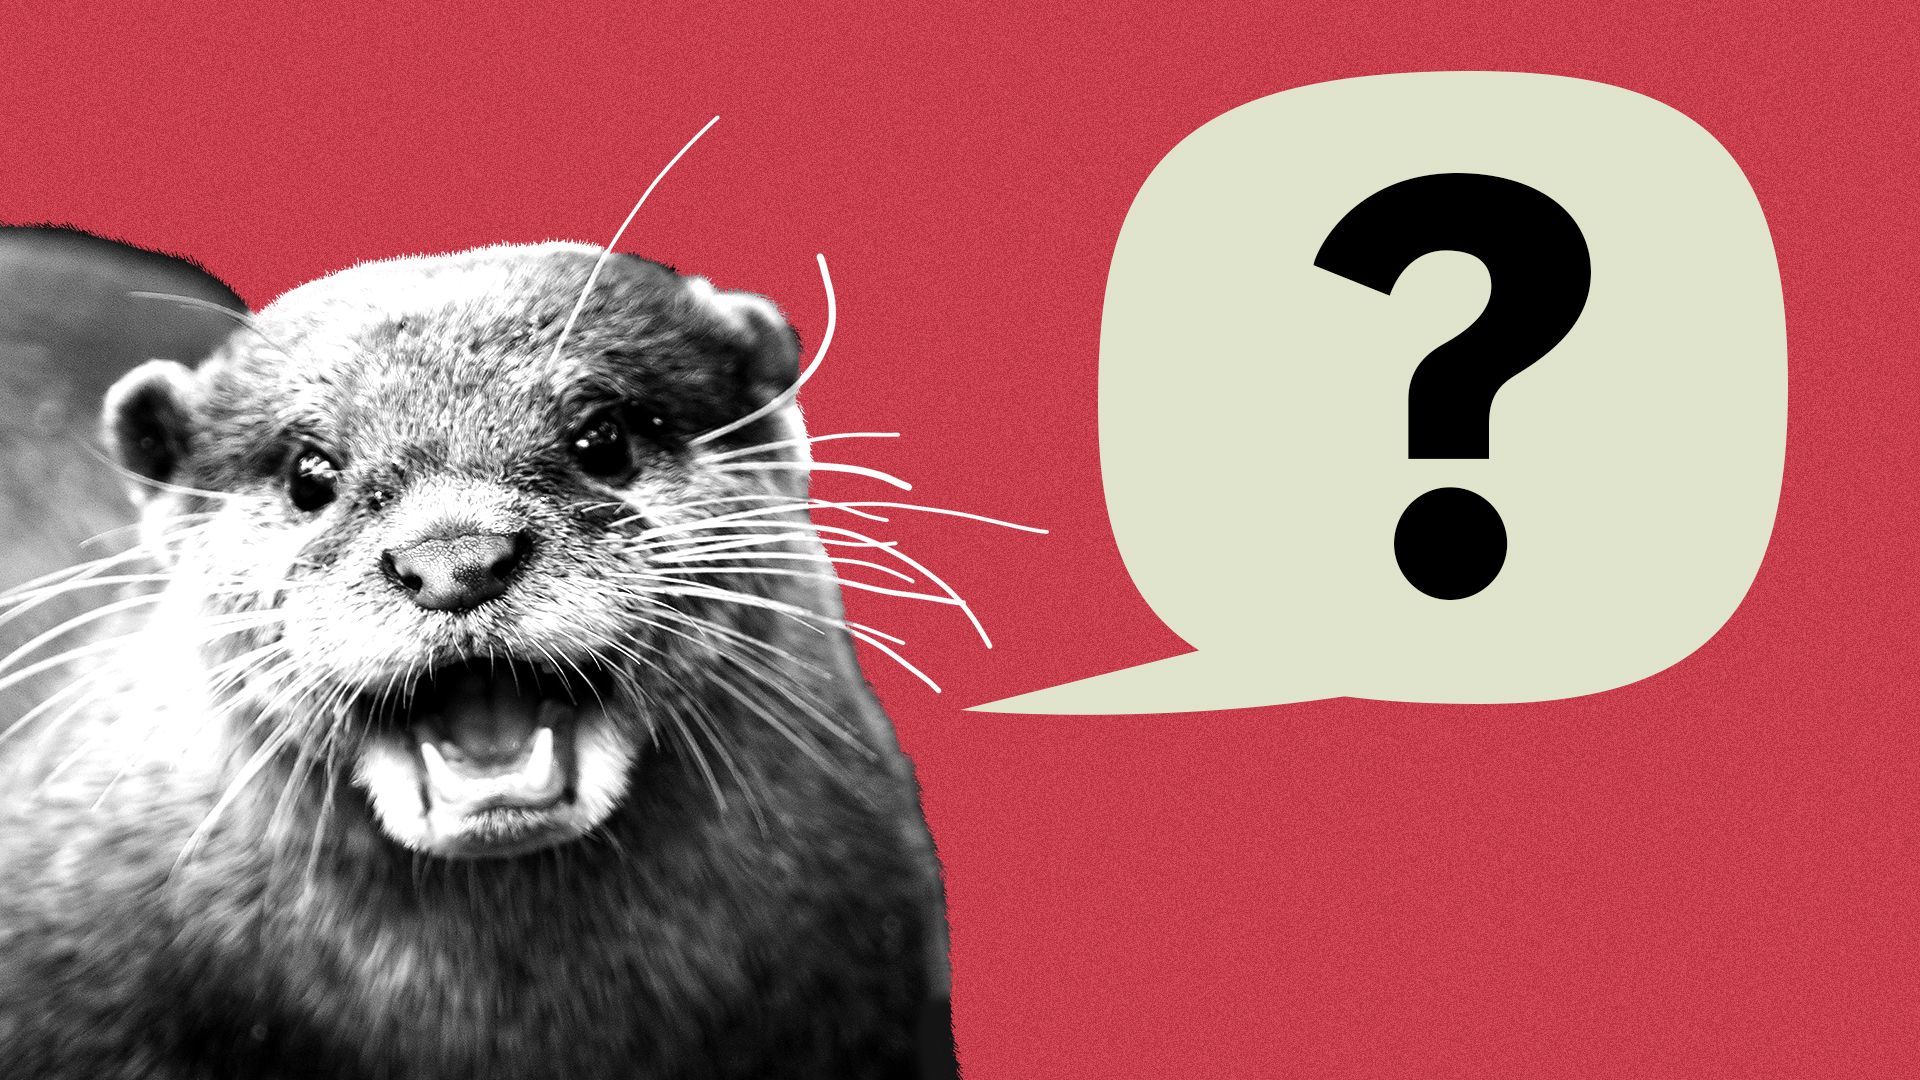 Illustration of an otter with a word balloon with a question mark in it coming out of its mouth.